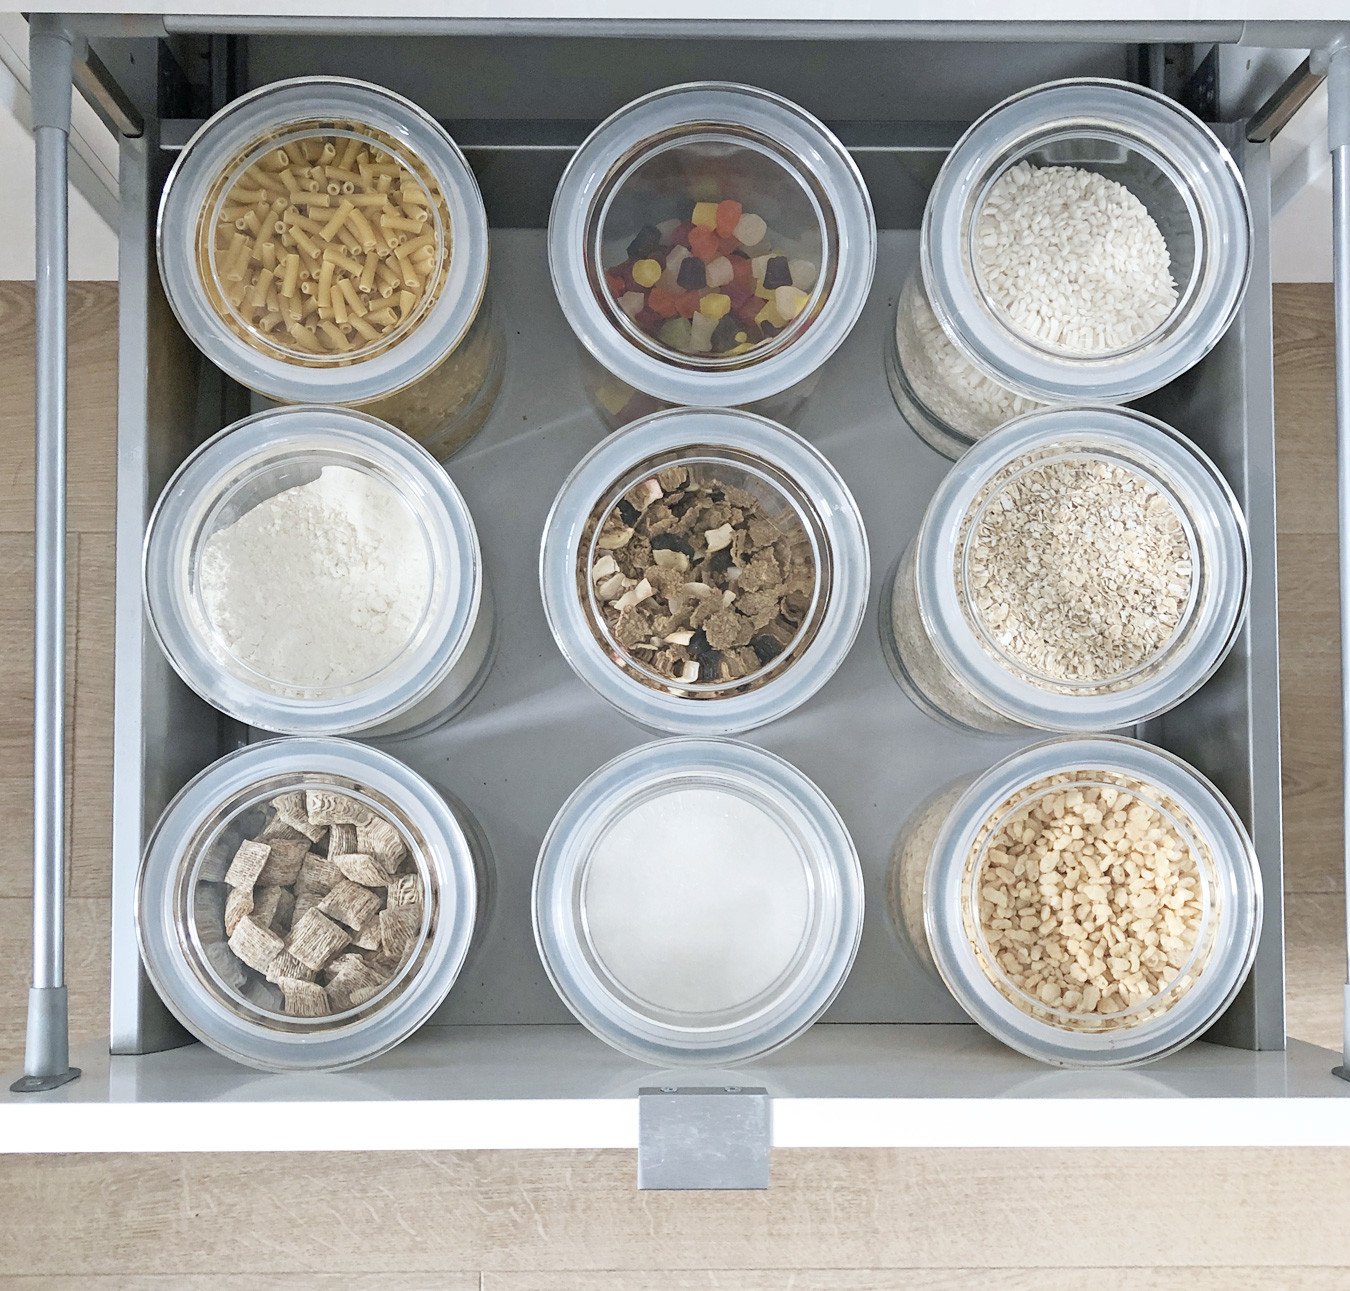 10 Ways To Use Ikea Storage Boxes To Organise Your Home